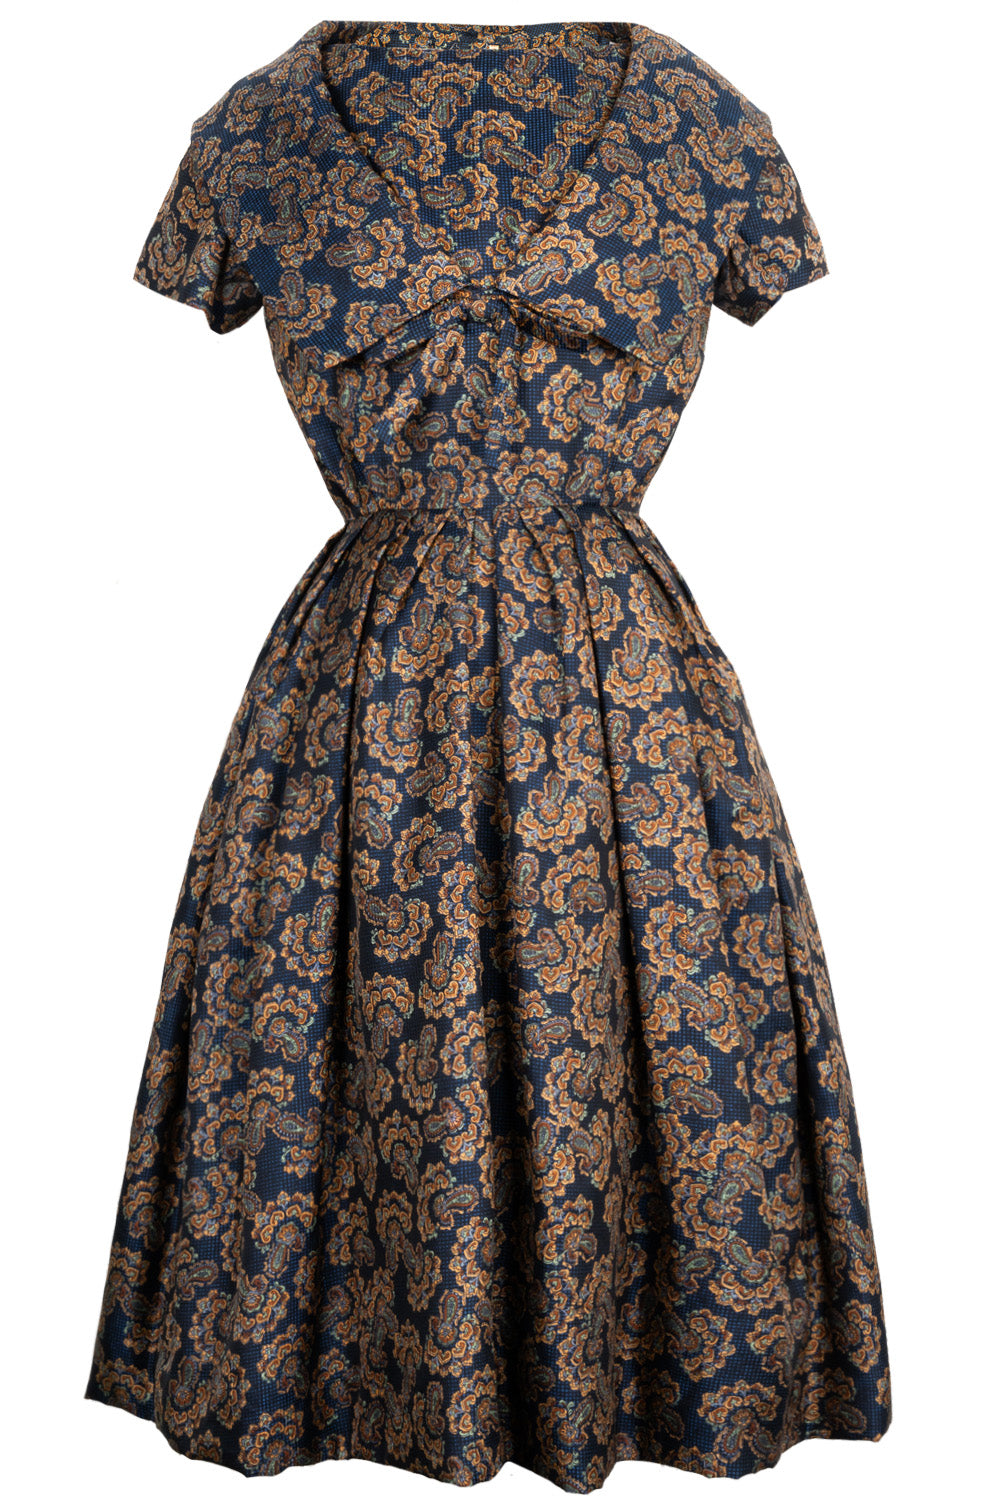 CHRISTIAN DIOR Vintage Couture Dress with Underpinning Silk Paisley